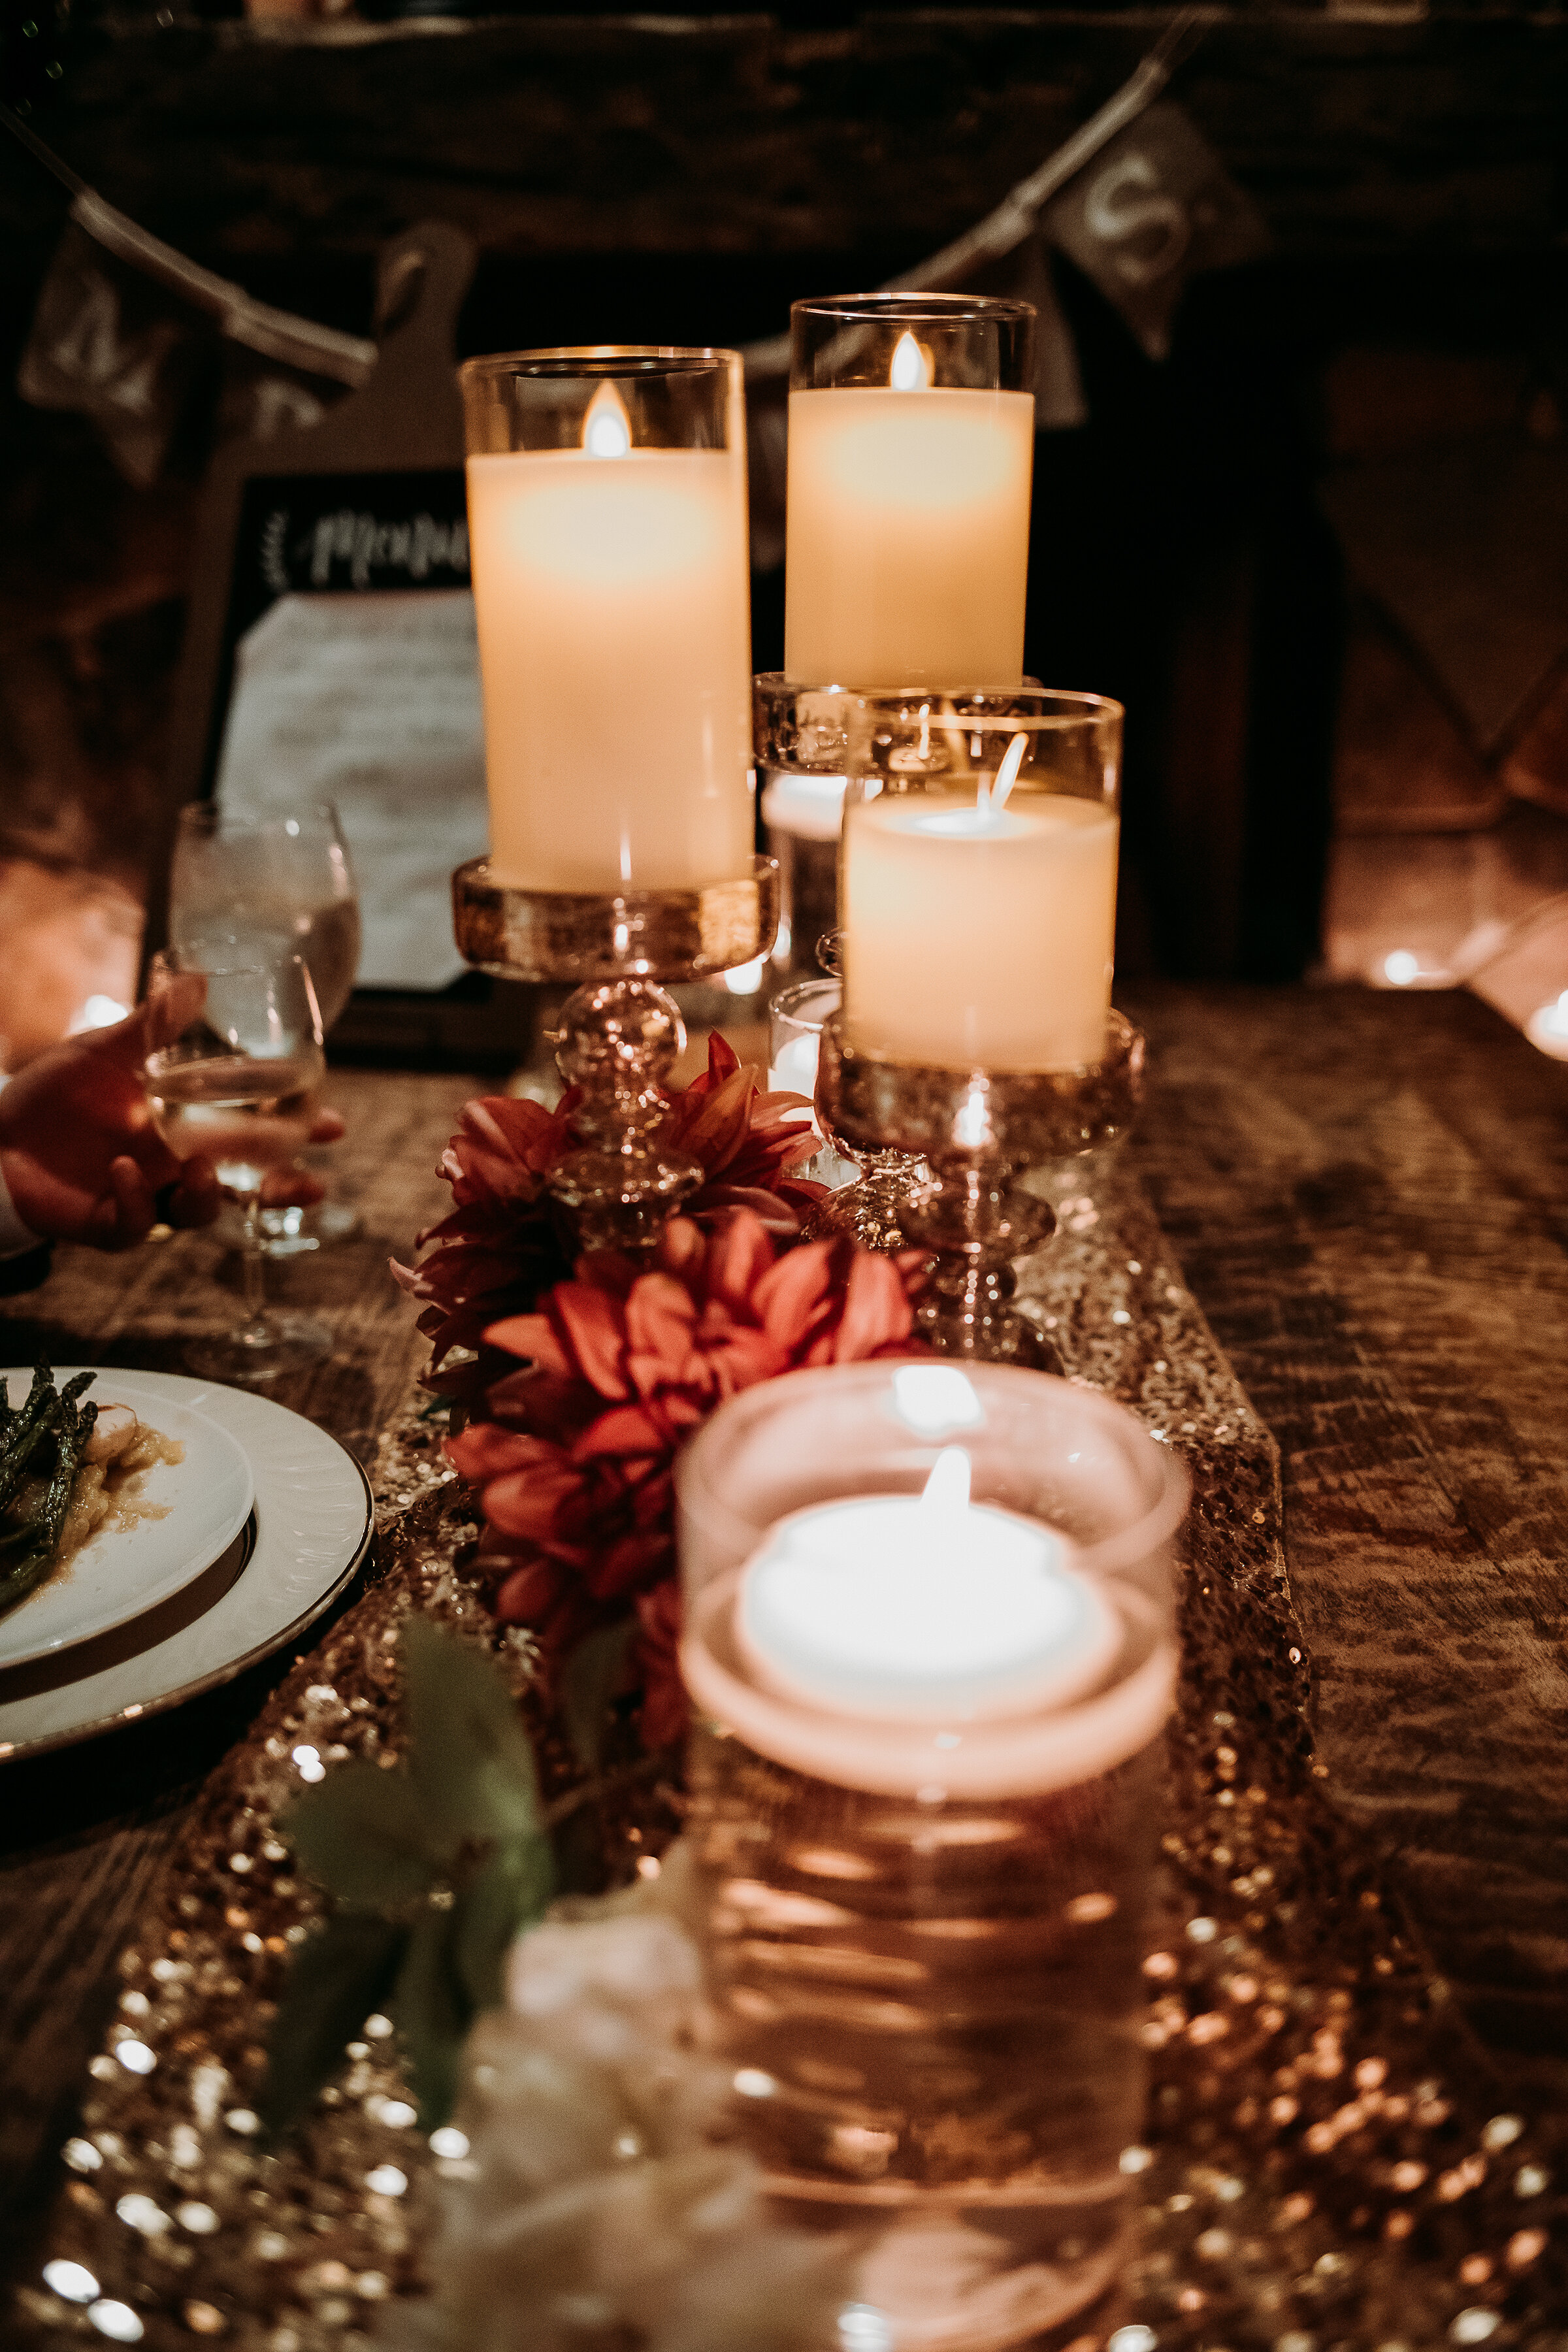  Elegant woodsy wedding table decor captured by Kindred + Co. Photography at this romantic candlelit treehouse elopement at the Grand Barn at the Mohicans. pinecone centerpiece, romantic candlelit dinner, white candles in vase, centerpiece candles, t